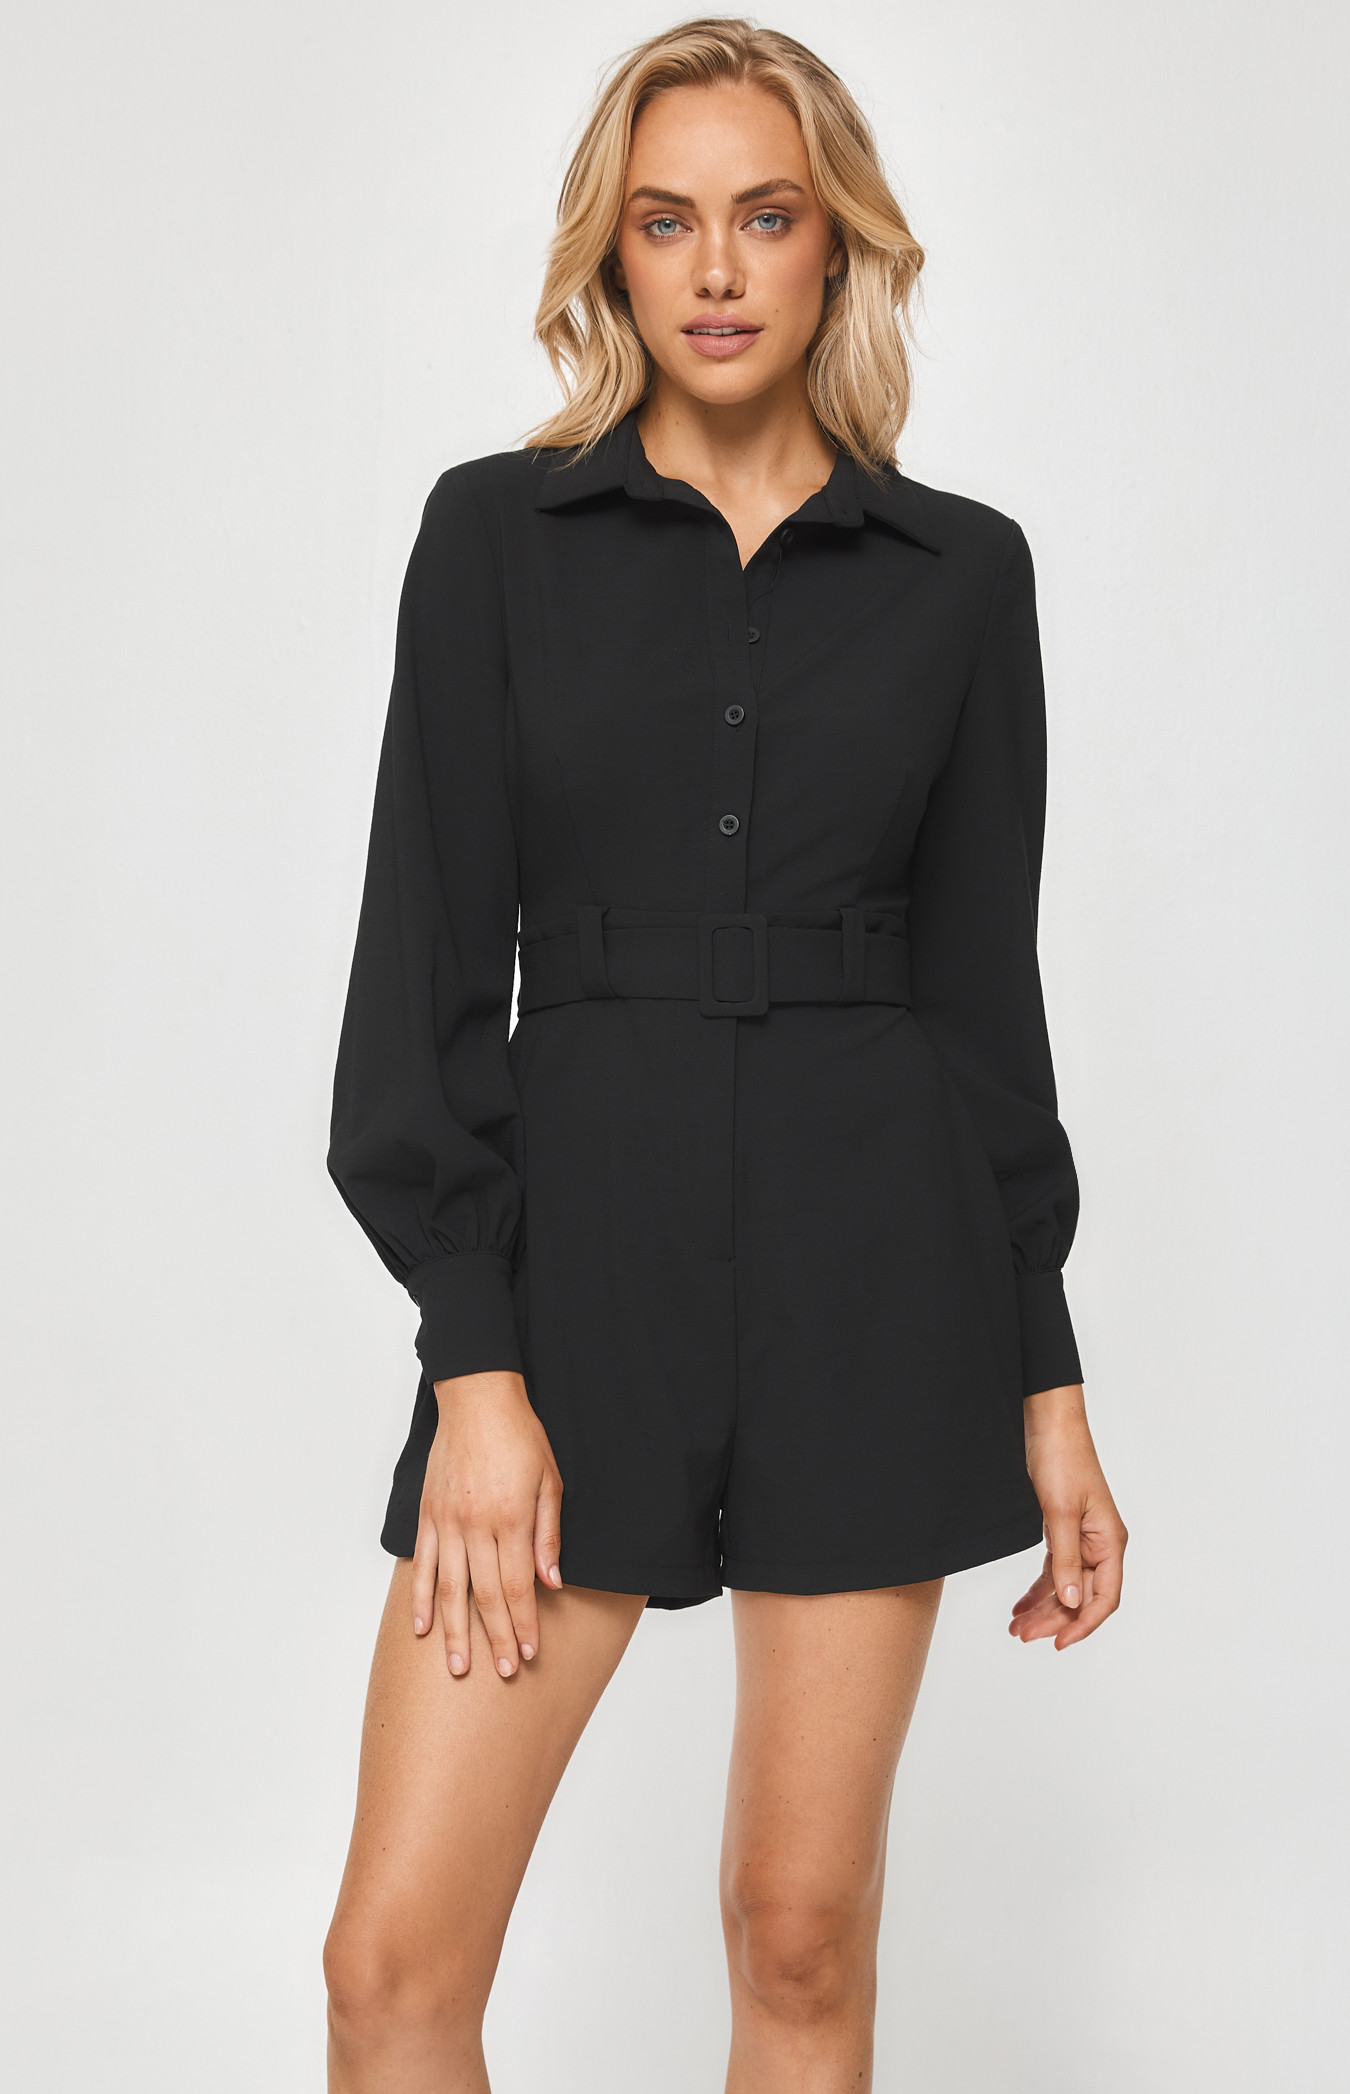 Collared Playsuit with Shirt Details and Belt (SJP529B)